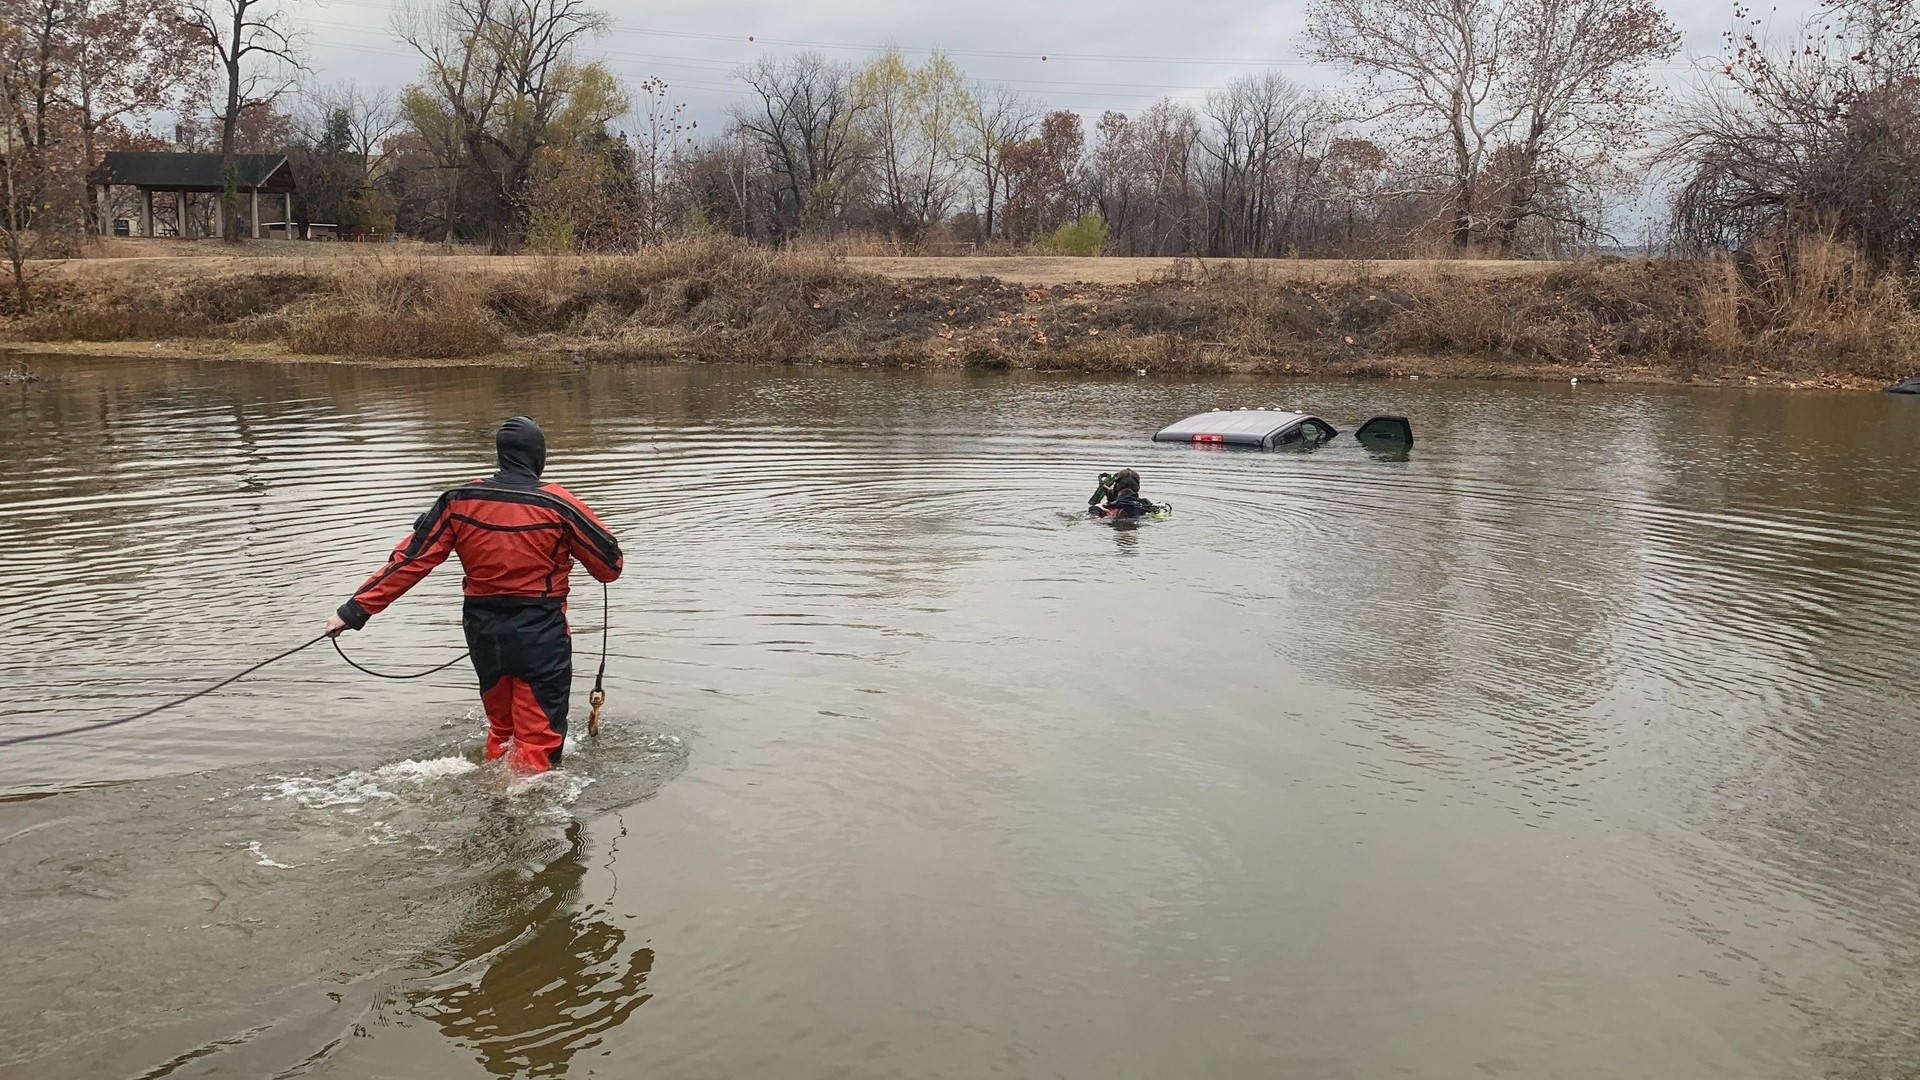 Submerged truck retrieved from river in Fort Smith | 5newsonline.com